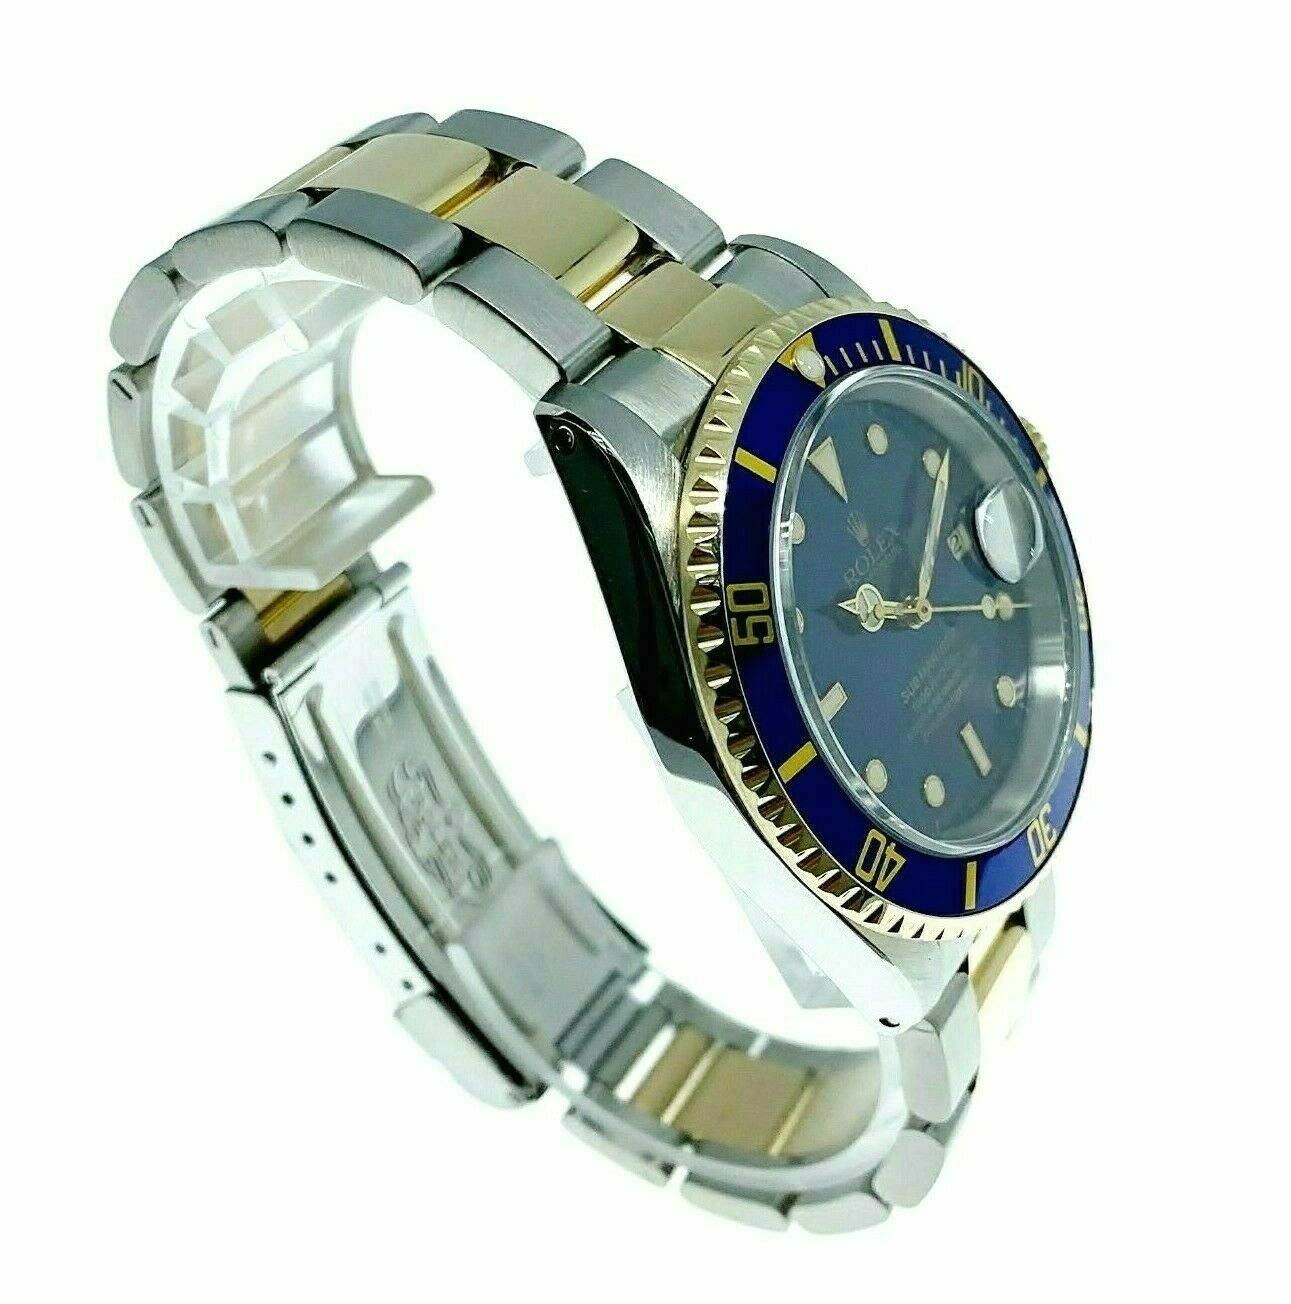 Rolex Blue Submariner Date 18K Yellow Gold & Steel Watch Ref 16613 with Papers